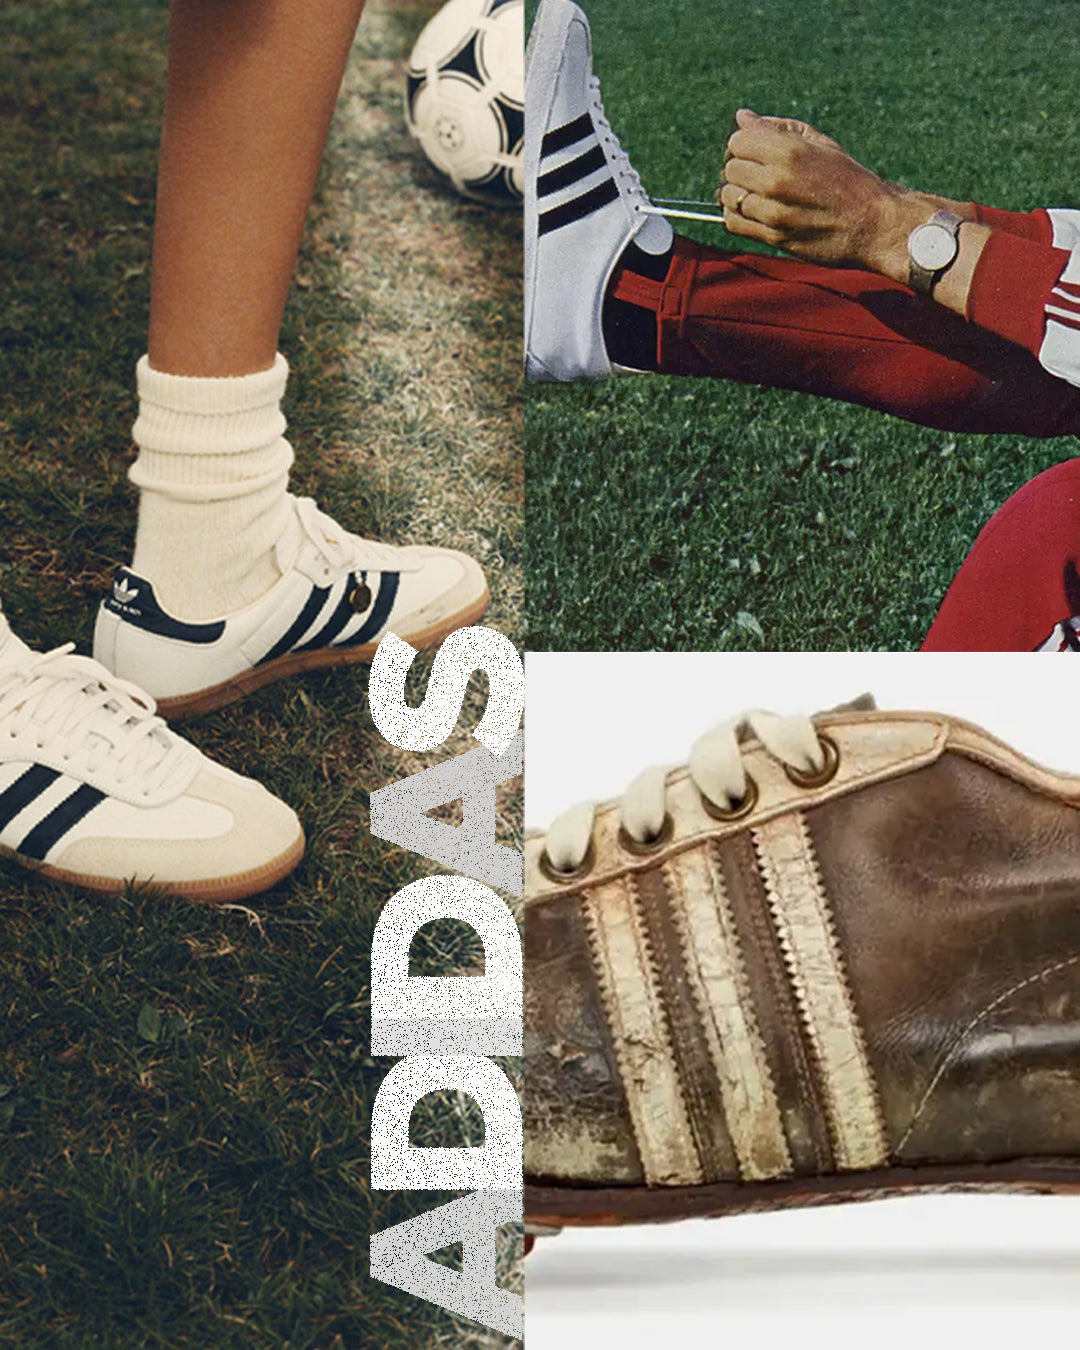 The story of 3 Stripes: Adidas